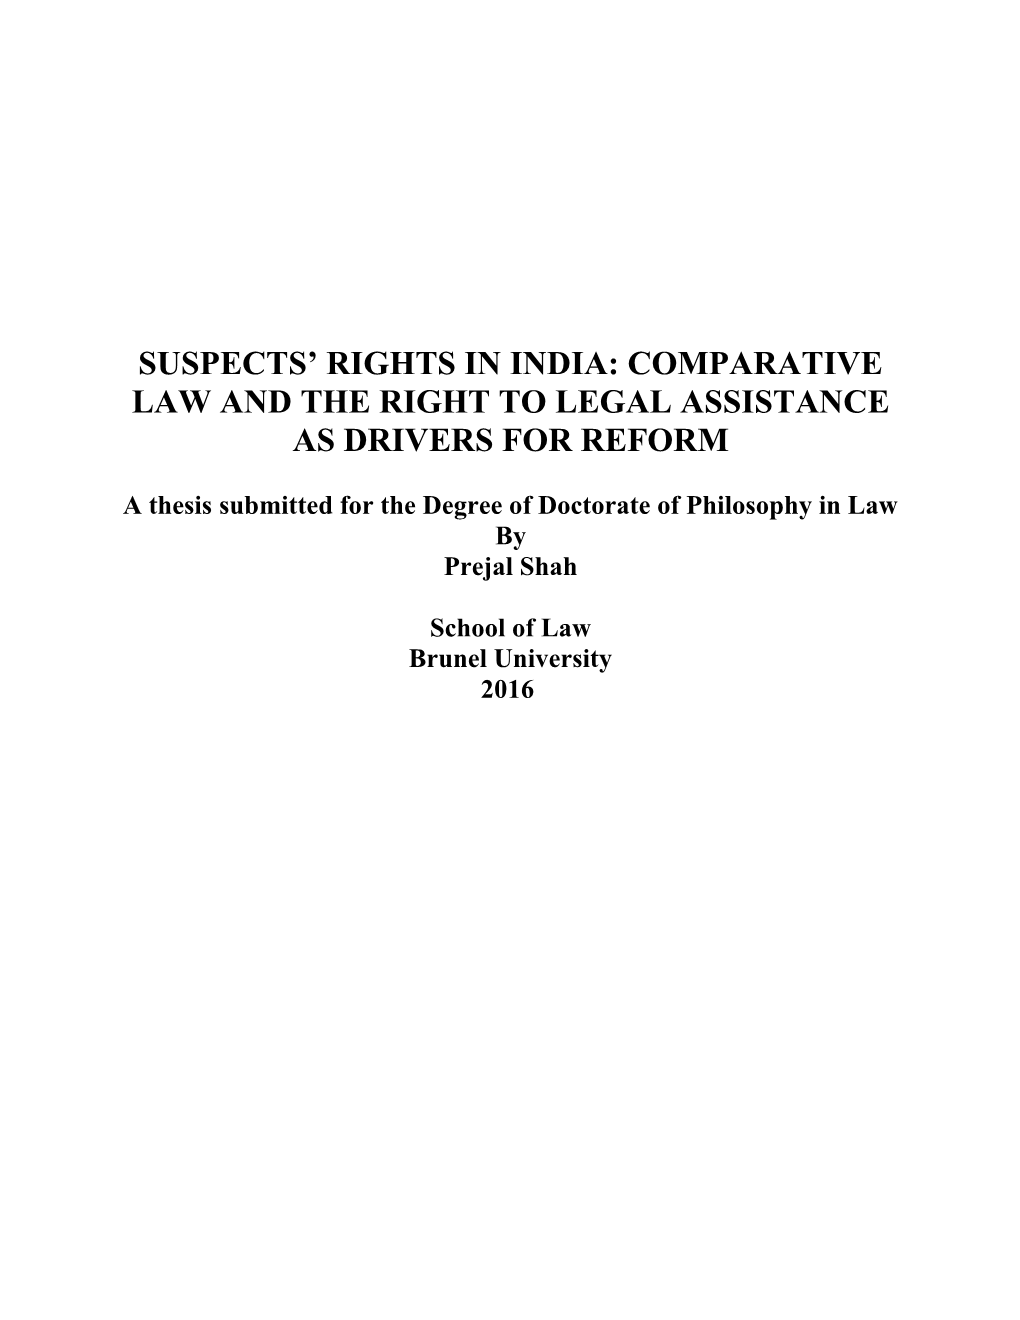 Suspects' Rights in India: Comparative Law and the Right to Legal Assistance As Drivers for Reform